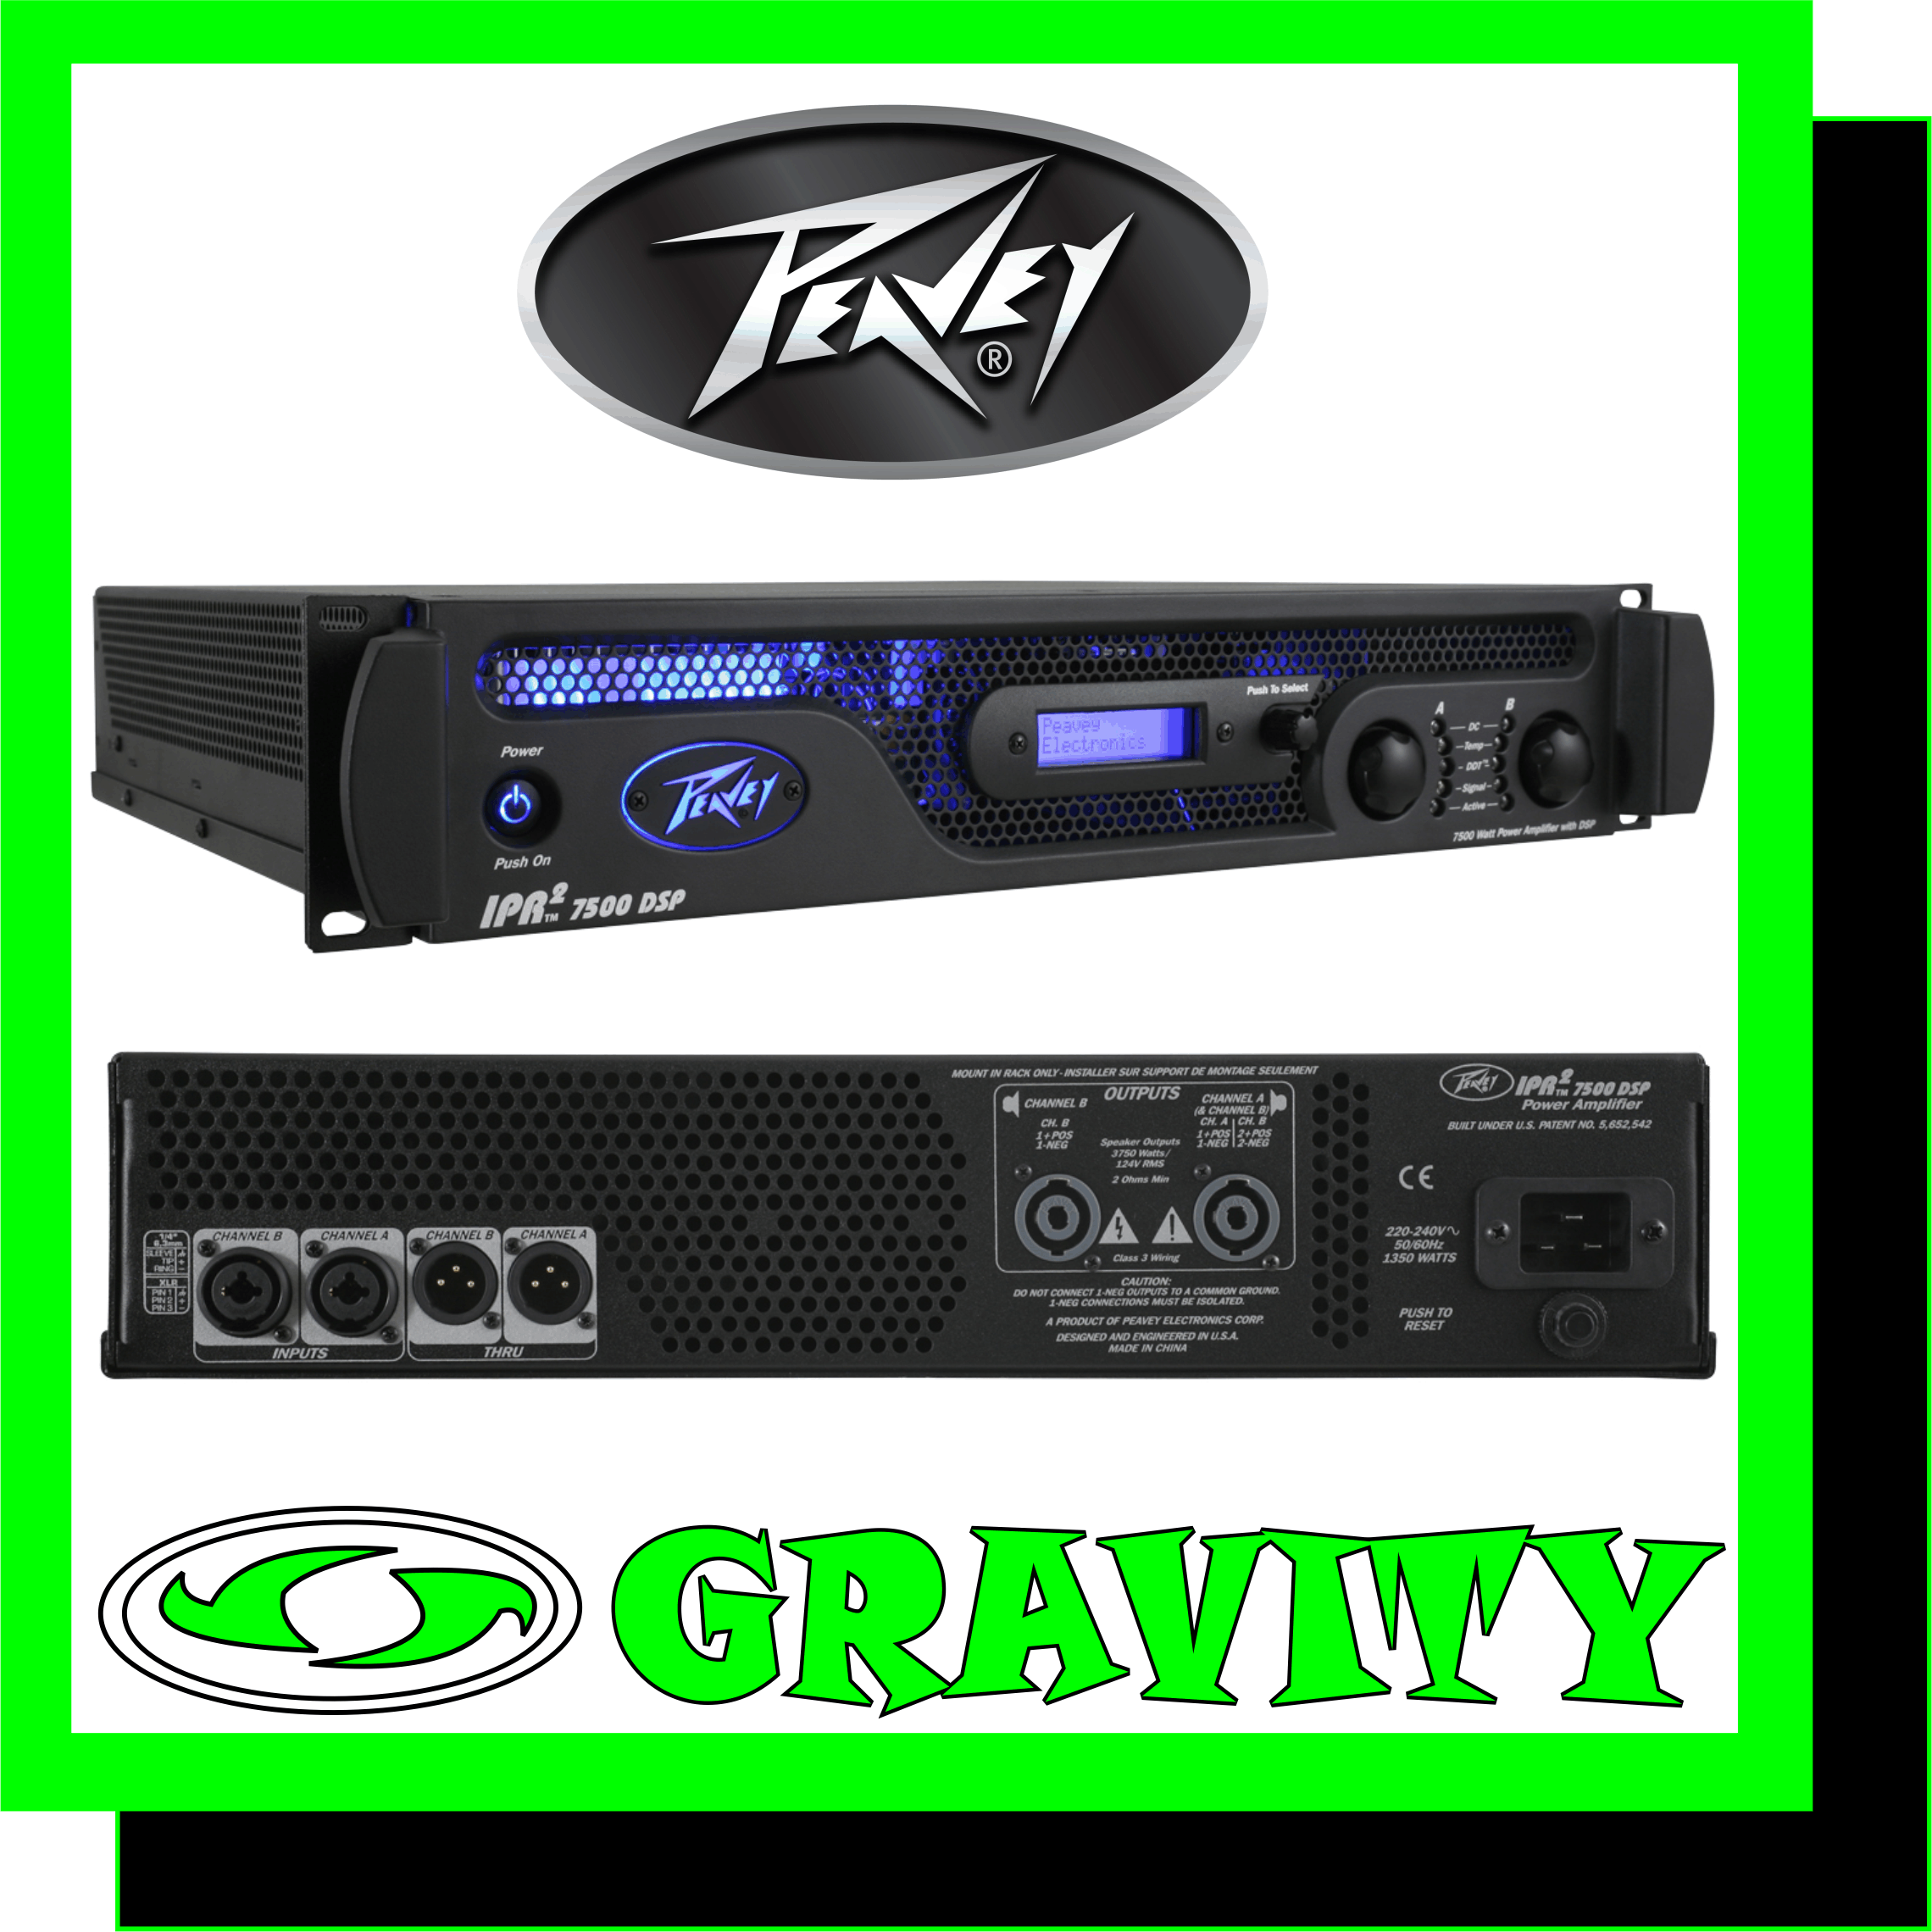 IPR2™ 7500 DSP  Features: -4750 watts 2 Channels @ 2 Ohms -2800 watts 2 Channels @ 4 Ohms -1550 watts 2 Channels @ 8 Ohms -3850W RMS x 1 at 2 ohms -2400W RMS x 1 at 4 ohms -1330W RMS x 1 at 8 ohms -Revolutionary IPR class D topology -Detented input controls -Combination XLR 1/4" inputs -Combination 1/4" or 1/4" 4 pole twist lock output connector -DDT™ protection -Individual signal pass-thru 1/4" jacks on each channel -Light weight -LED illuminated -DSP-based Loudspeaker Management System -120 ms of delay per channel -4 bands of parametric equalization per channel -Security lock -Adjustable fourth-order Linkwitz-Riley Crossover -Adjustable fourth-order high-pass filter each channel -Setup wizard -MAXX Bass® -Horn EQ each channel -Blue, backlit LCD screen -Weight Unpacked: 14.57 lb(6.61 kg) -Weight Packed: 18.39 lb(8.34 kg) -Width Packed: 21"(53.34 cm) -Height Packed: 21.2"(53.848 cm) -Depth Packed: 6"(15.24 cm)  Overview IPR2™ power amplifiers, designed for years of reliable, flawless operation under rigorous use. The groundbreaking IPR2 series utilizes an advanced design that allows Peavey engineers to dramatically reduce weight while increasing output power, reliability and thermal efficiency. IPR2 Series amplifiers are designed with a resonant switch-mode power supply and a high-speed class D topology that yields the highest audio resolution and efficiency available. This revolutionary amplifier offers the sonic superiority and unsurpassed reliability for which Peavey is famous, in an extremely efficient and lightweight design. Advanced technology and extensive protection circuitry allow operation with greater efficiency into difficult loads and power conditions. The DDT™ (Distortion Detection Technique) circuitry ensures trouble-free operation into loads as low as 2 ohms. DDT protects drivers and ensures that sonic integrity is maintained, even in extreme overload conditions. The IPR2's high-efficiency design allows the amplifier to operate at very low temperatures, and does not require massive heat sinks to cool. As the name implies, the IPR2™ 5000 and 7500 DSP all include advanced digital signal processing. The DSP was designed to be incredibly effective, yet extremely easy to use. Using unique and revolutionary advanced bass enhancement processes, the IPR2 DSP amplifiers dramatically improve the perceived level of bass in any system, using a fraction of the power that would be required with any other power amplifier.